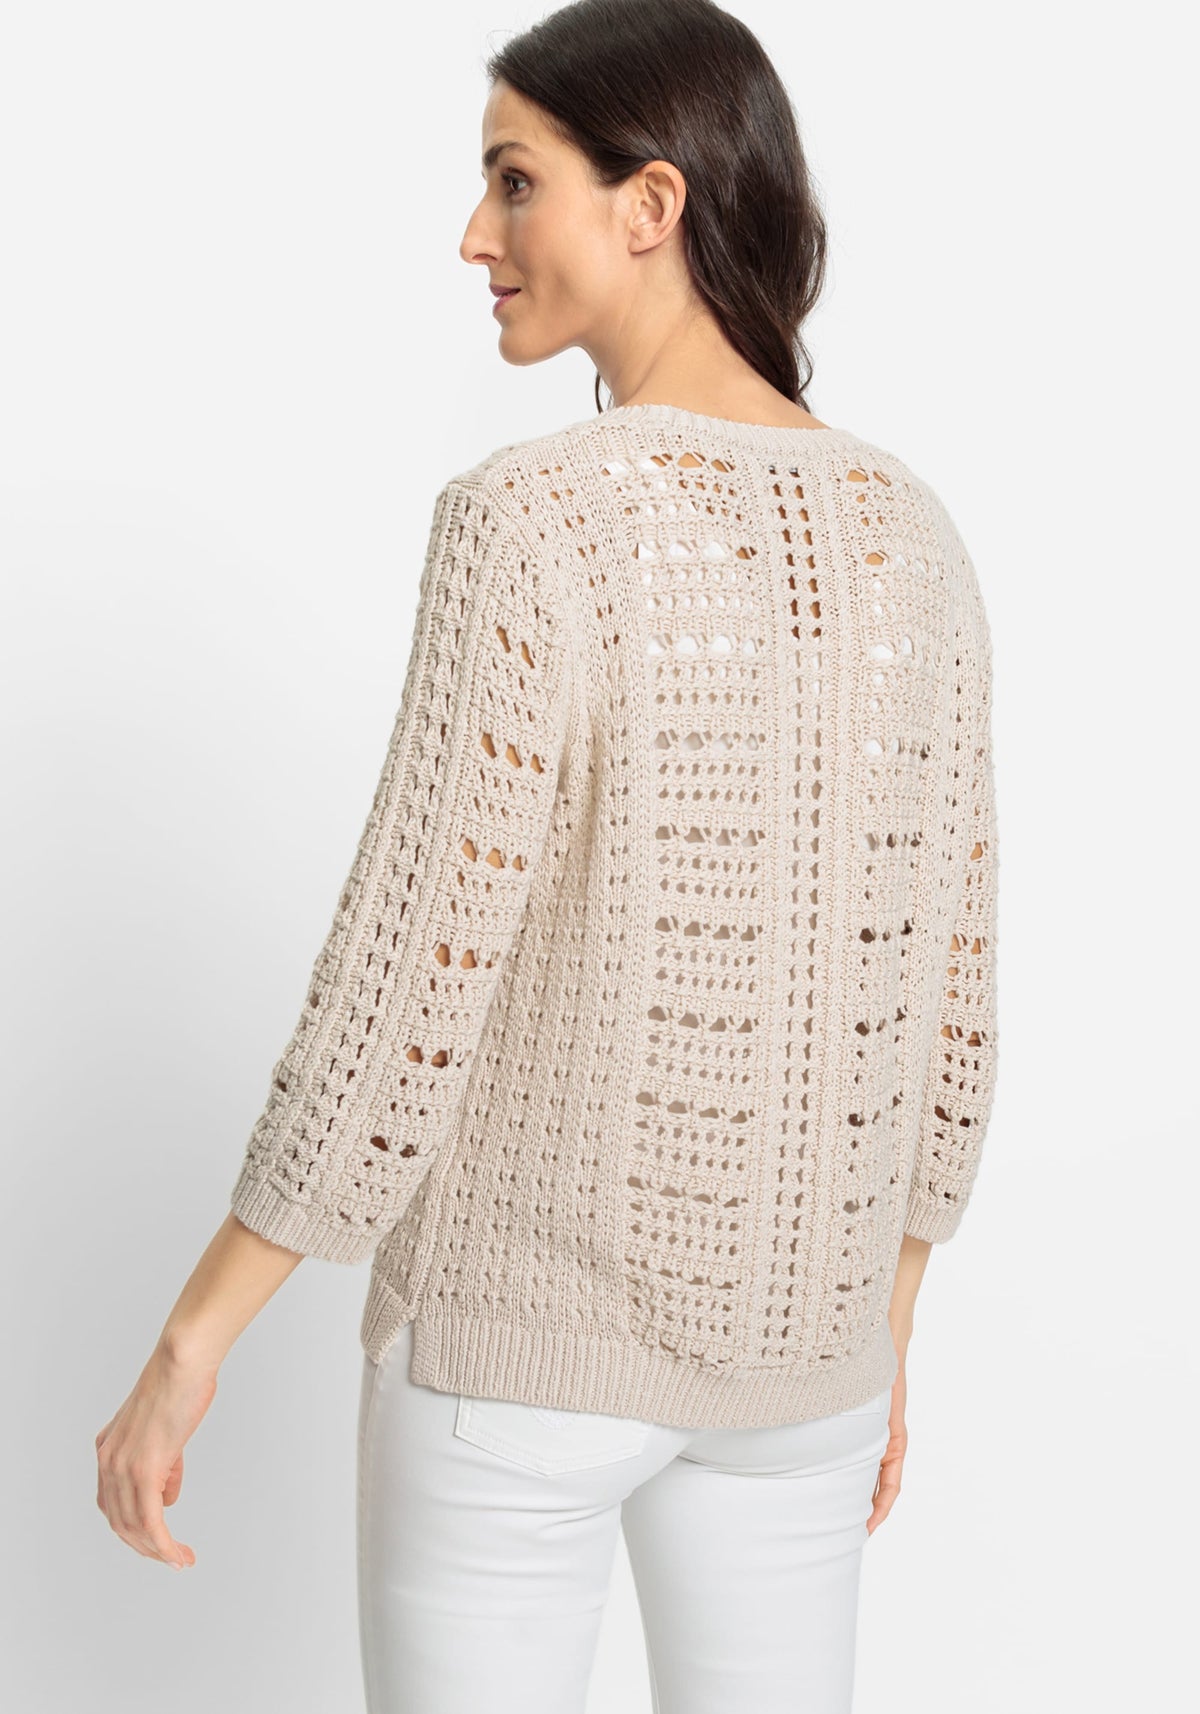 Cotton Blend 3/4 Sleeve Open Knit Pullover